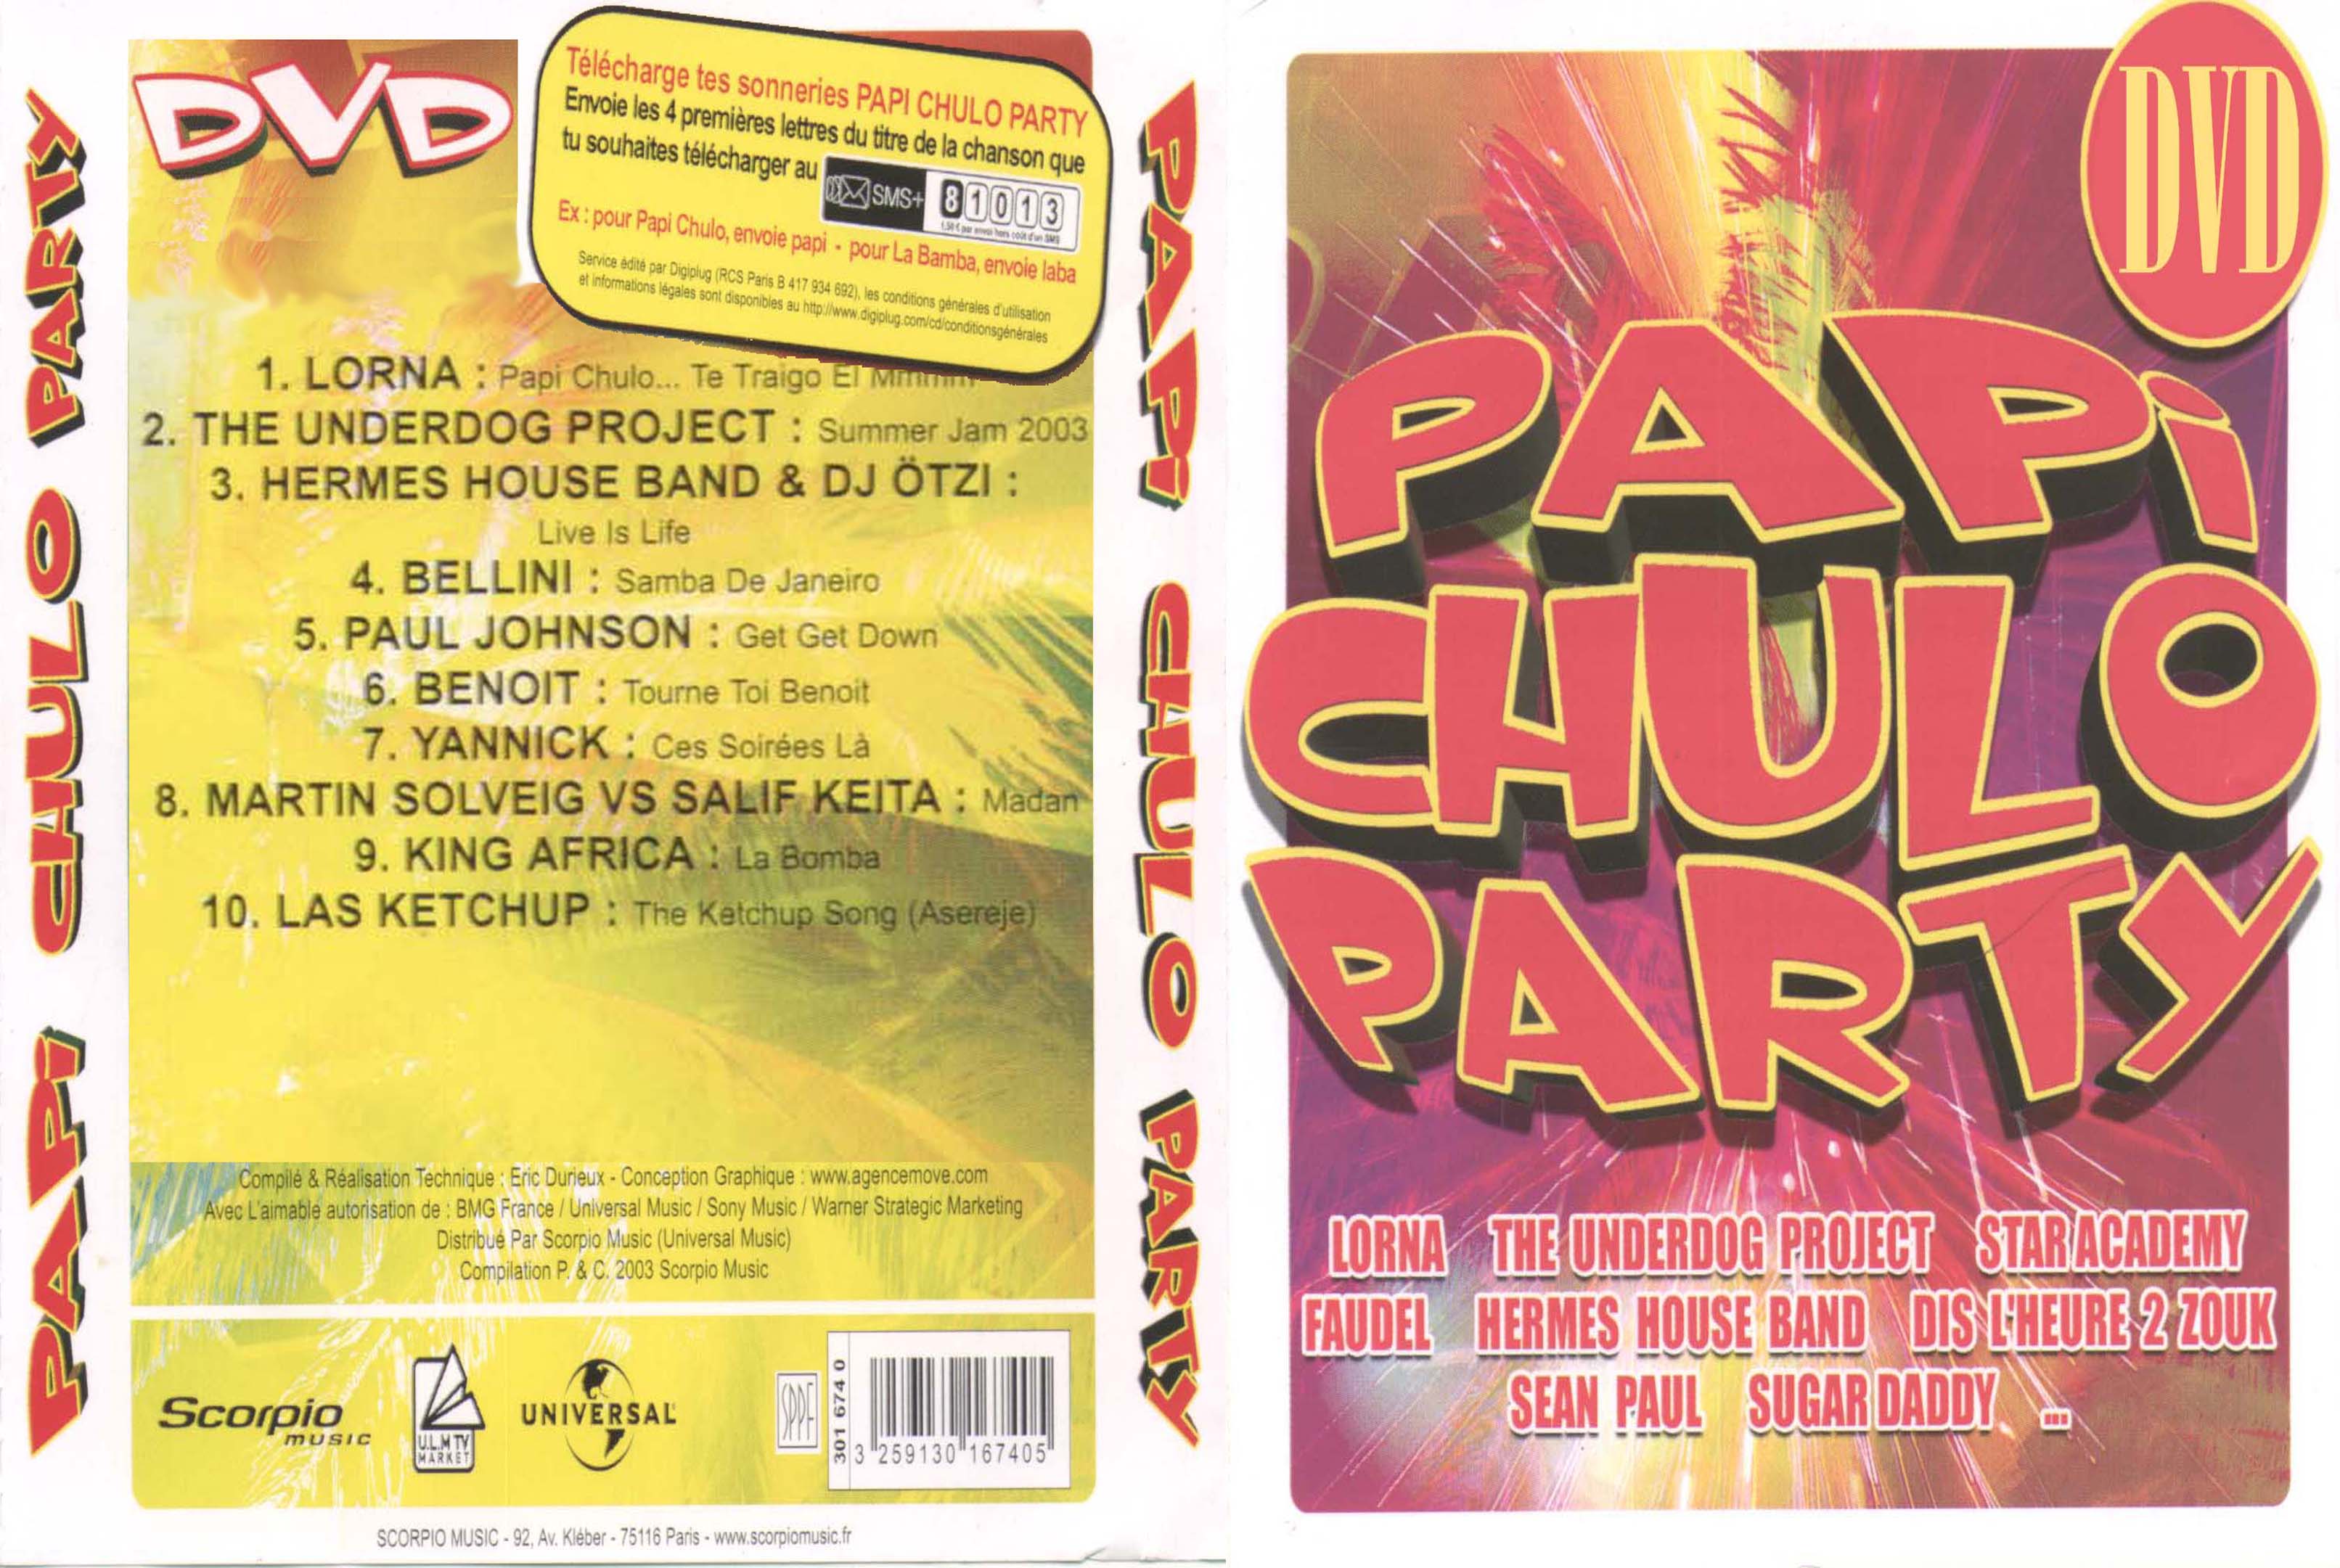 Jaquette DVD Papi chulo party